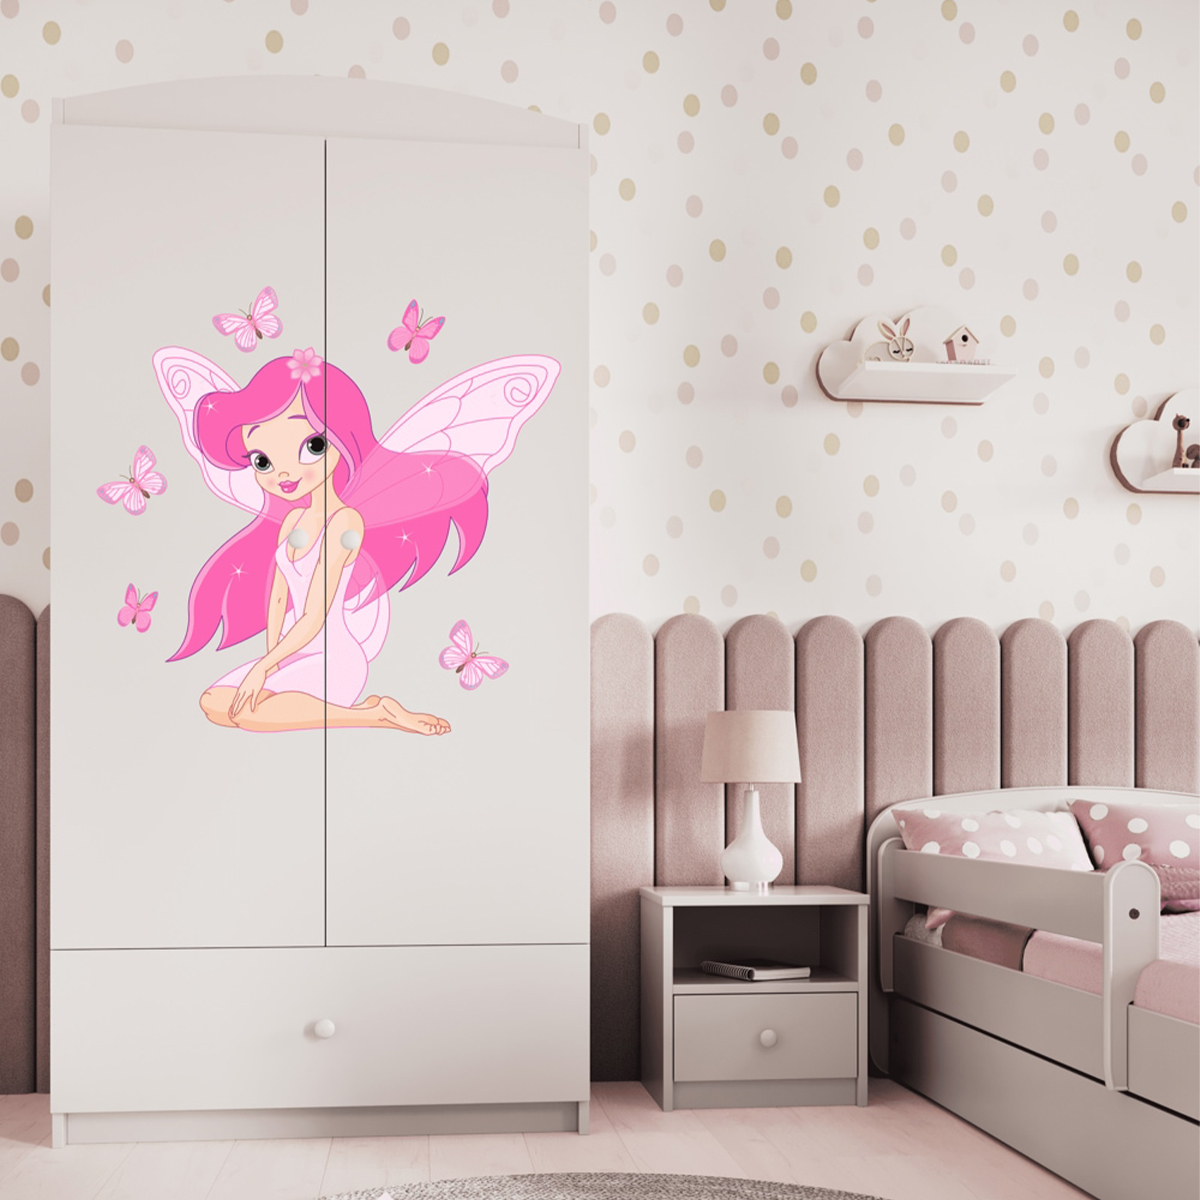 kocot-babydream-fee-armoire-ambiance